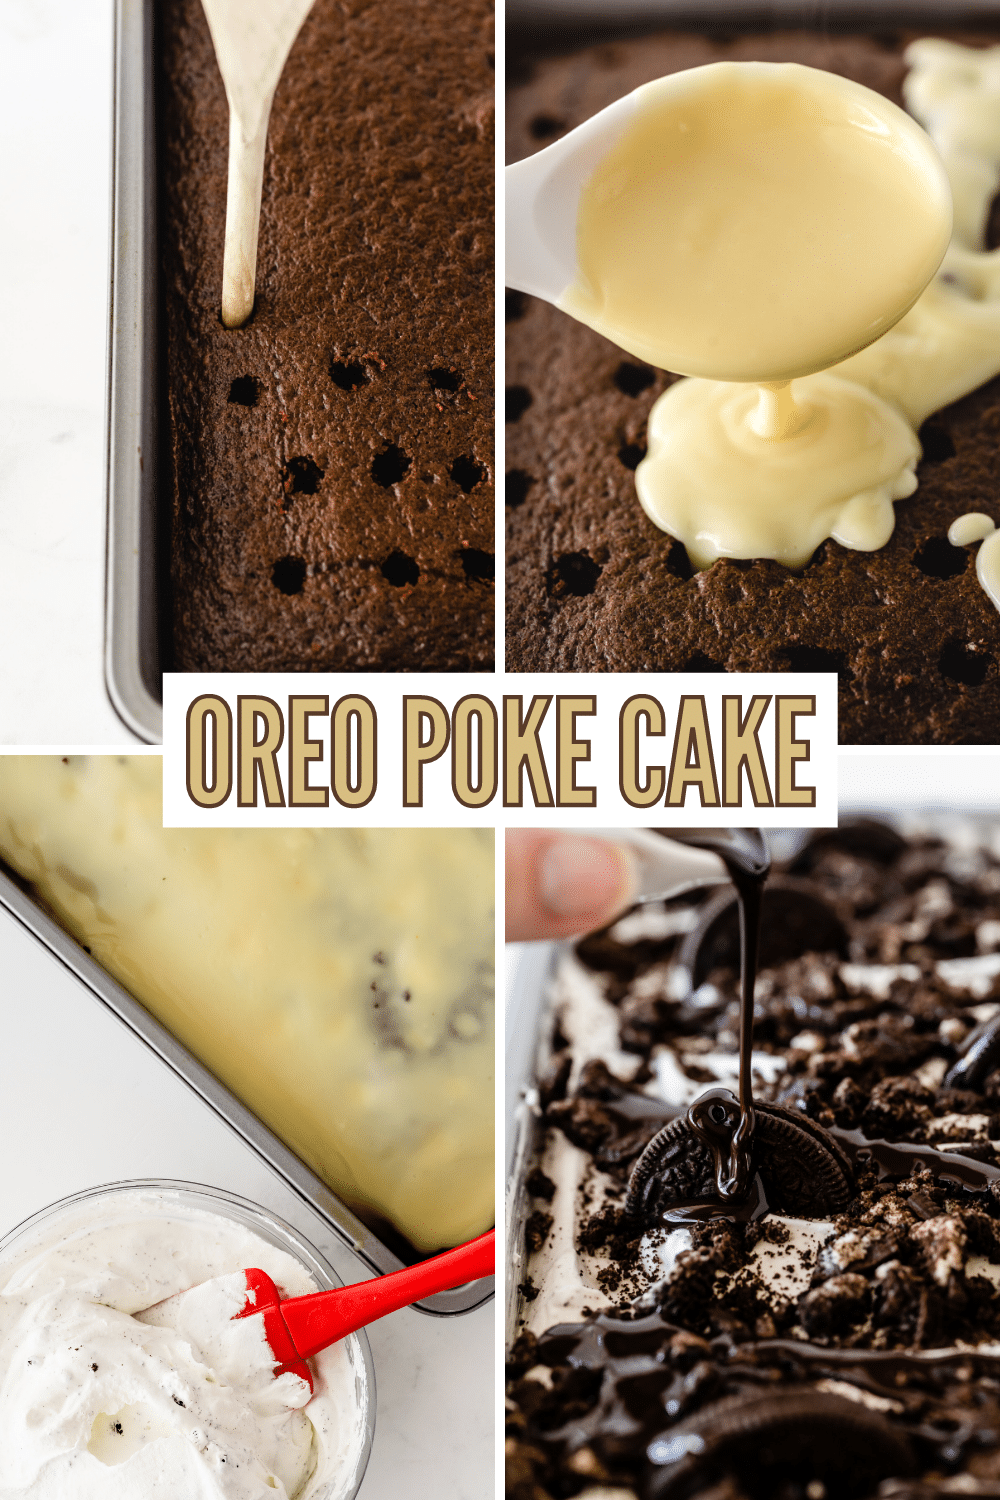 Whenever I want to make a delicious cake for any occasion, I get my trusted recipe book out and go straight to this Oreo poke cake recipe. #pokecake #oreopokecake #cake #dessert #recipe via @wondermomwannab